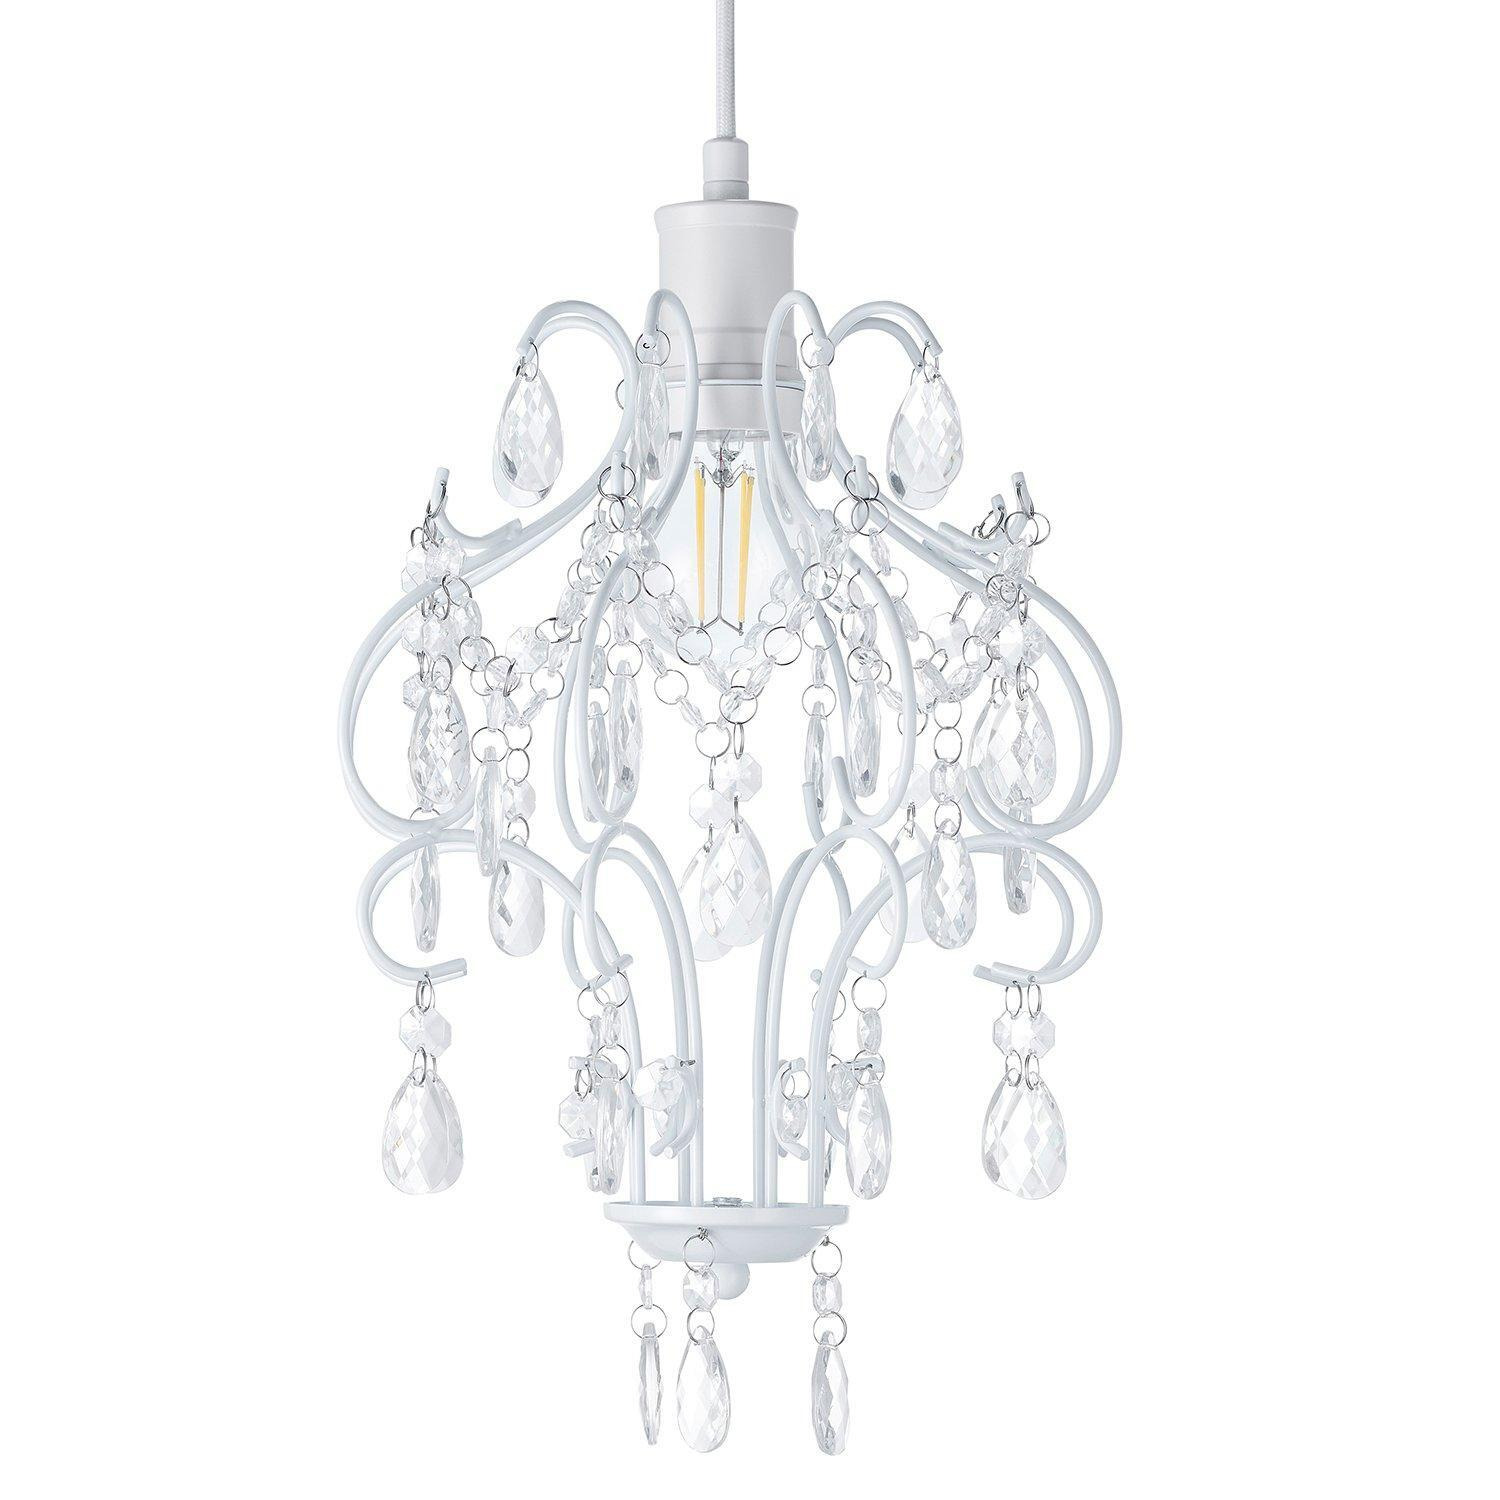 Matt White Shabby Chic Chandelier Style Pendant Ceiling Lamp Shade with Acrylic - image 1